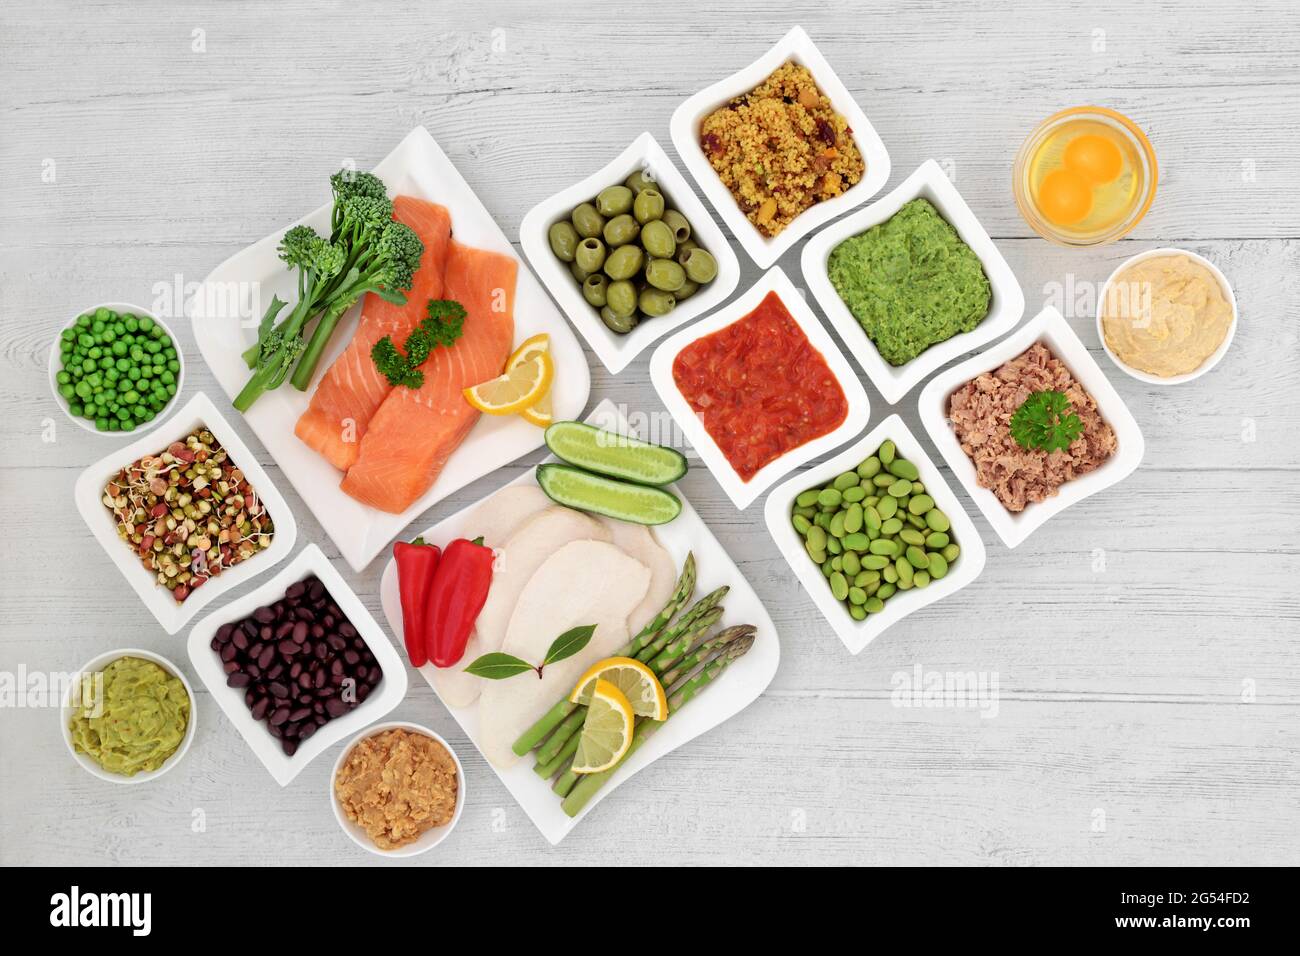 Low glycemic health food for diabetics for a healthy lifestyle with foods below 55 on the GI scale. Stock Photo